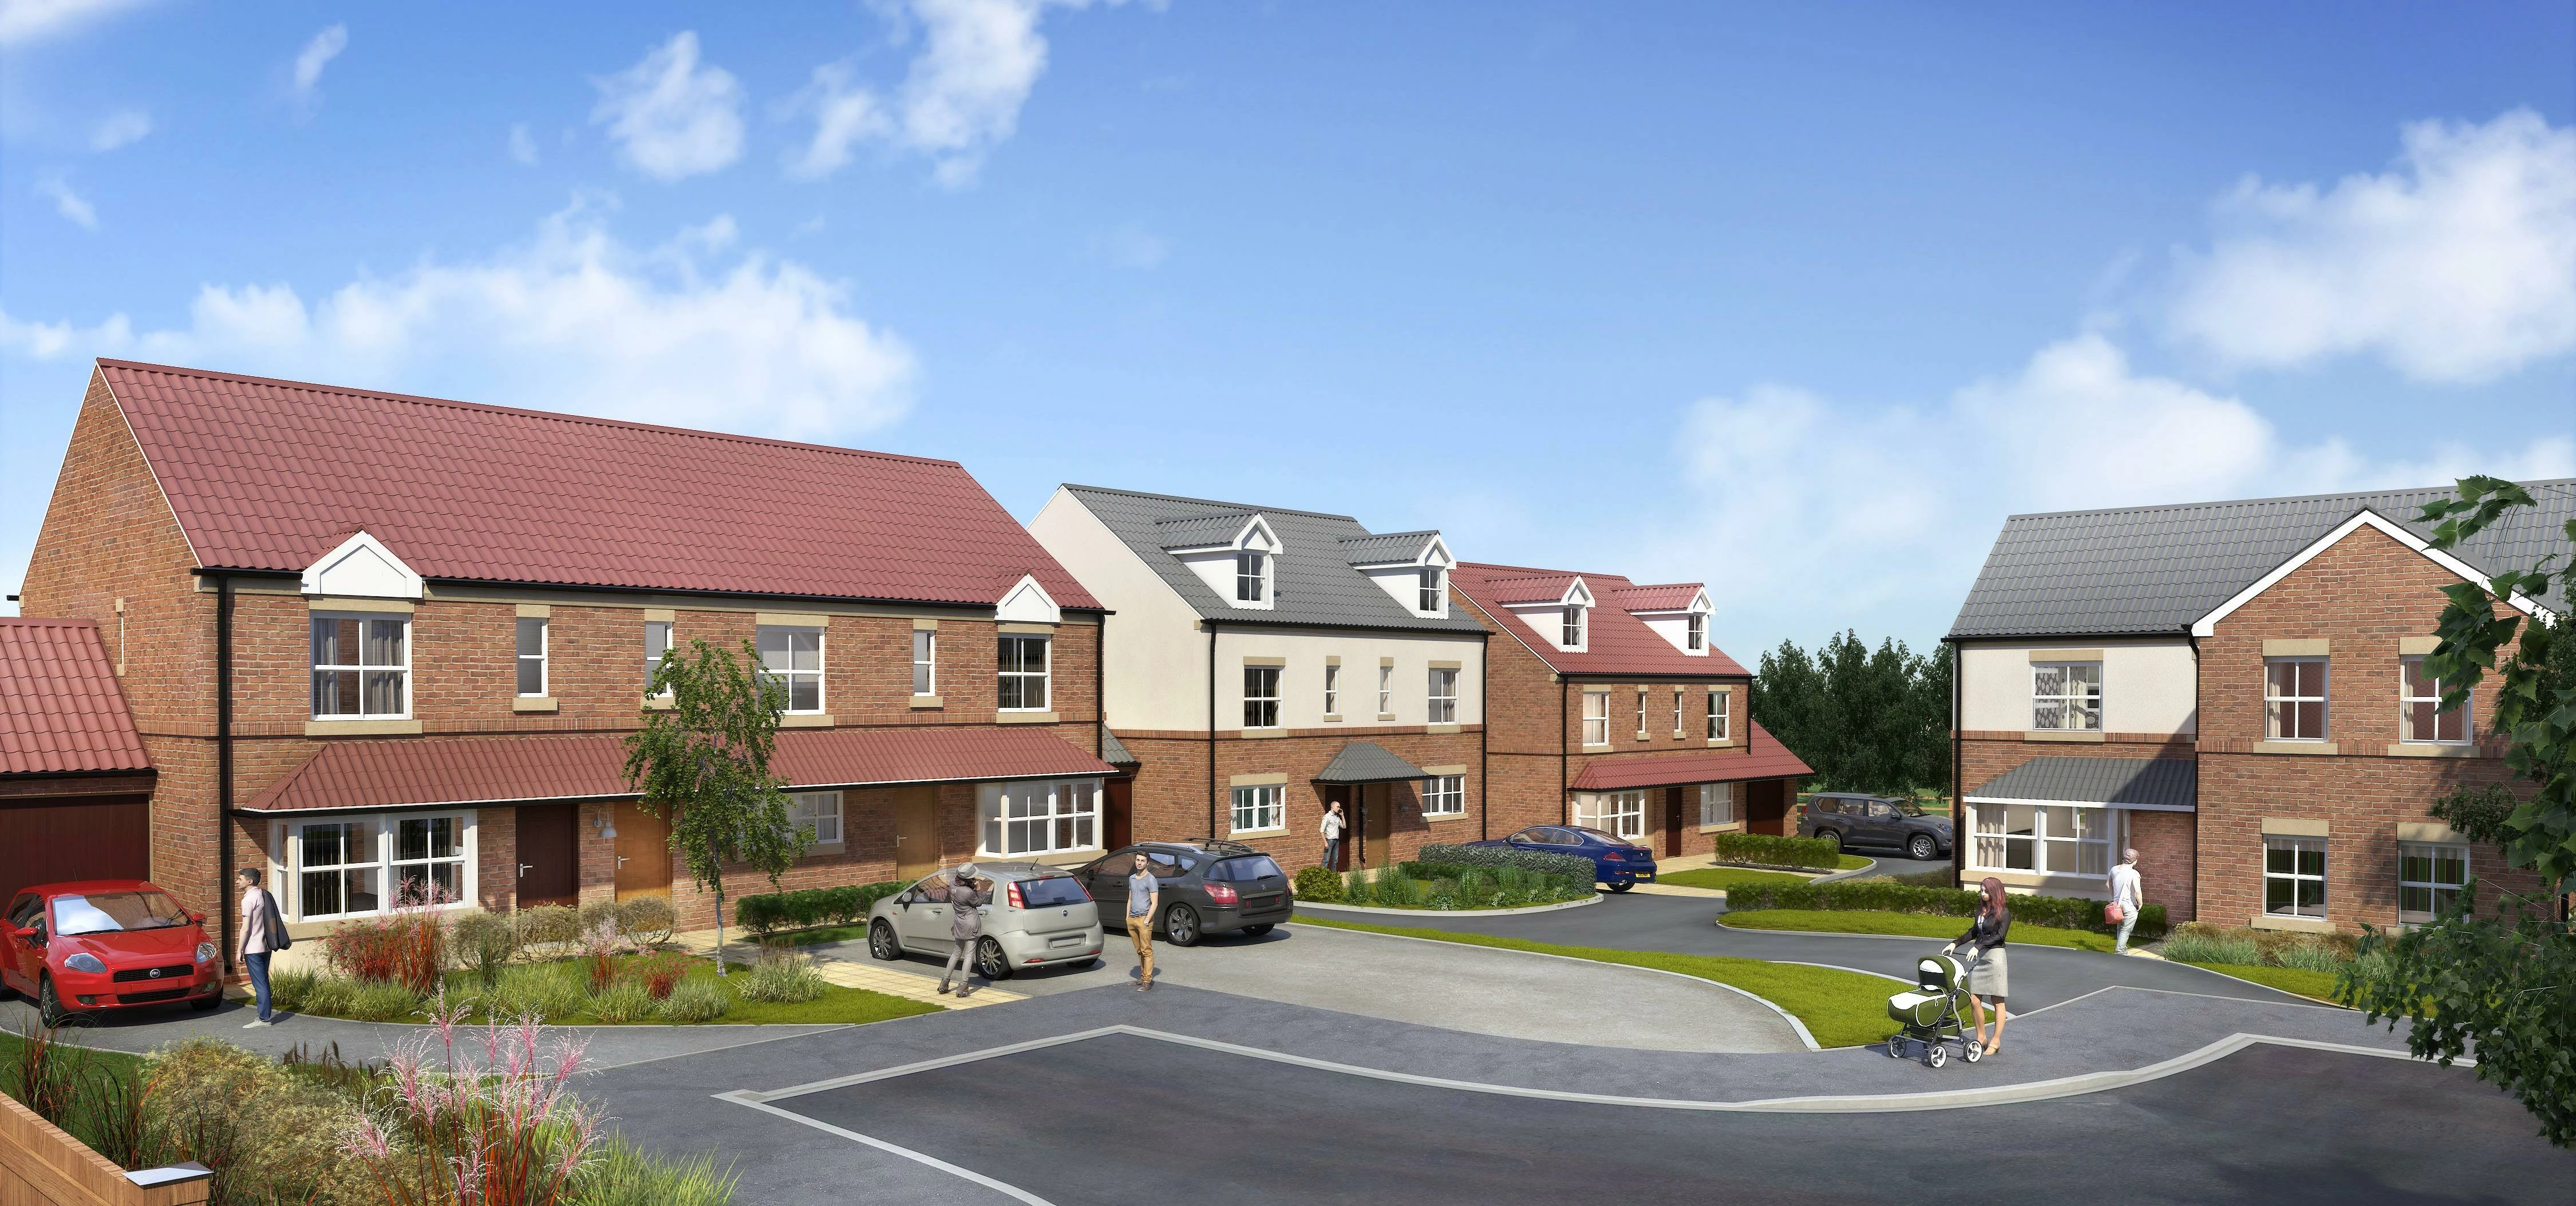 50 per cent sold at Ripon new homes development